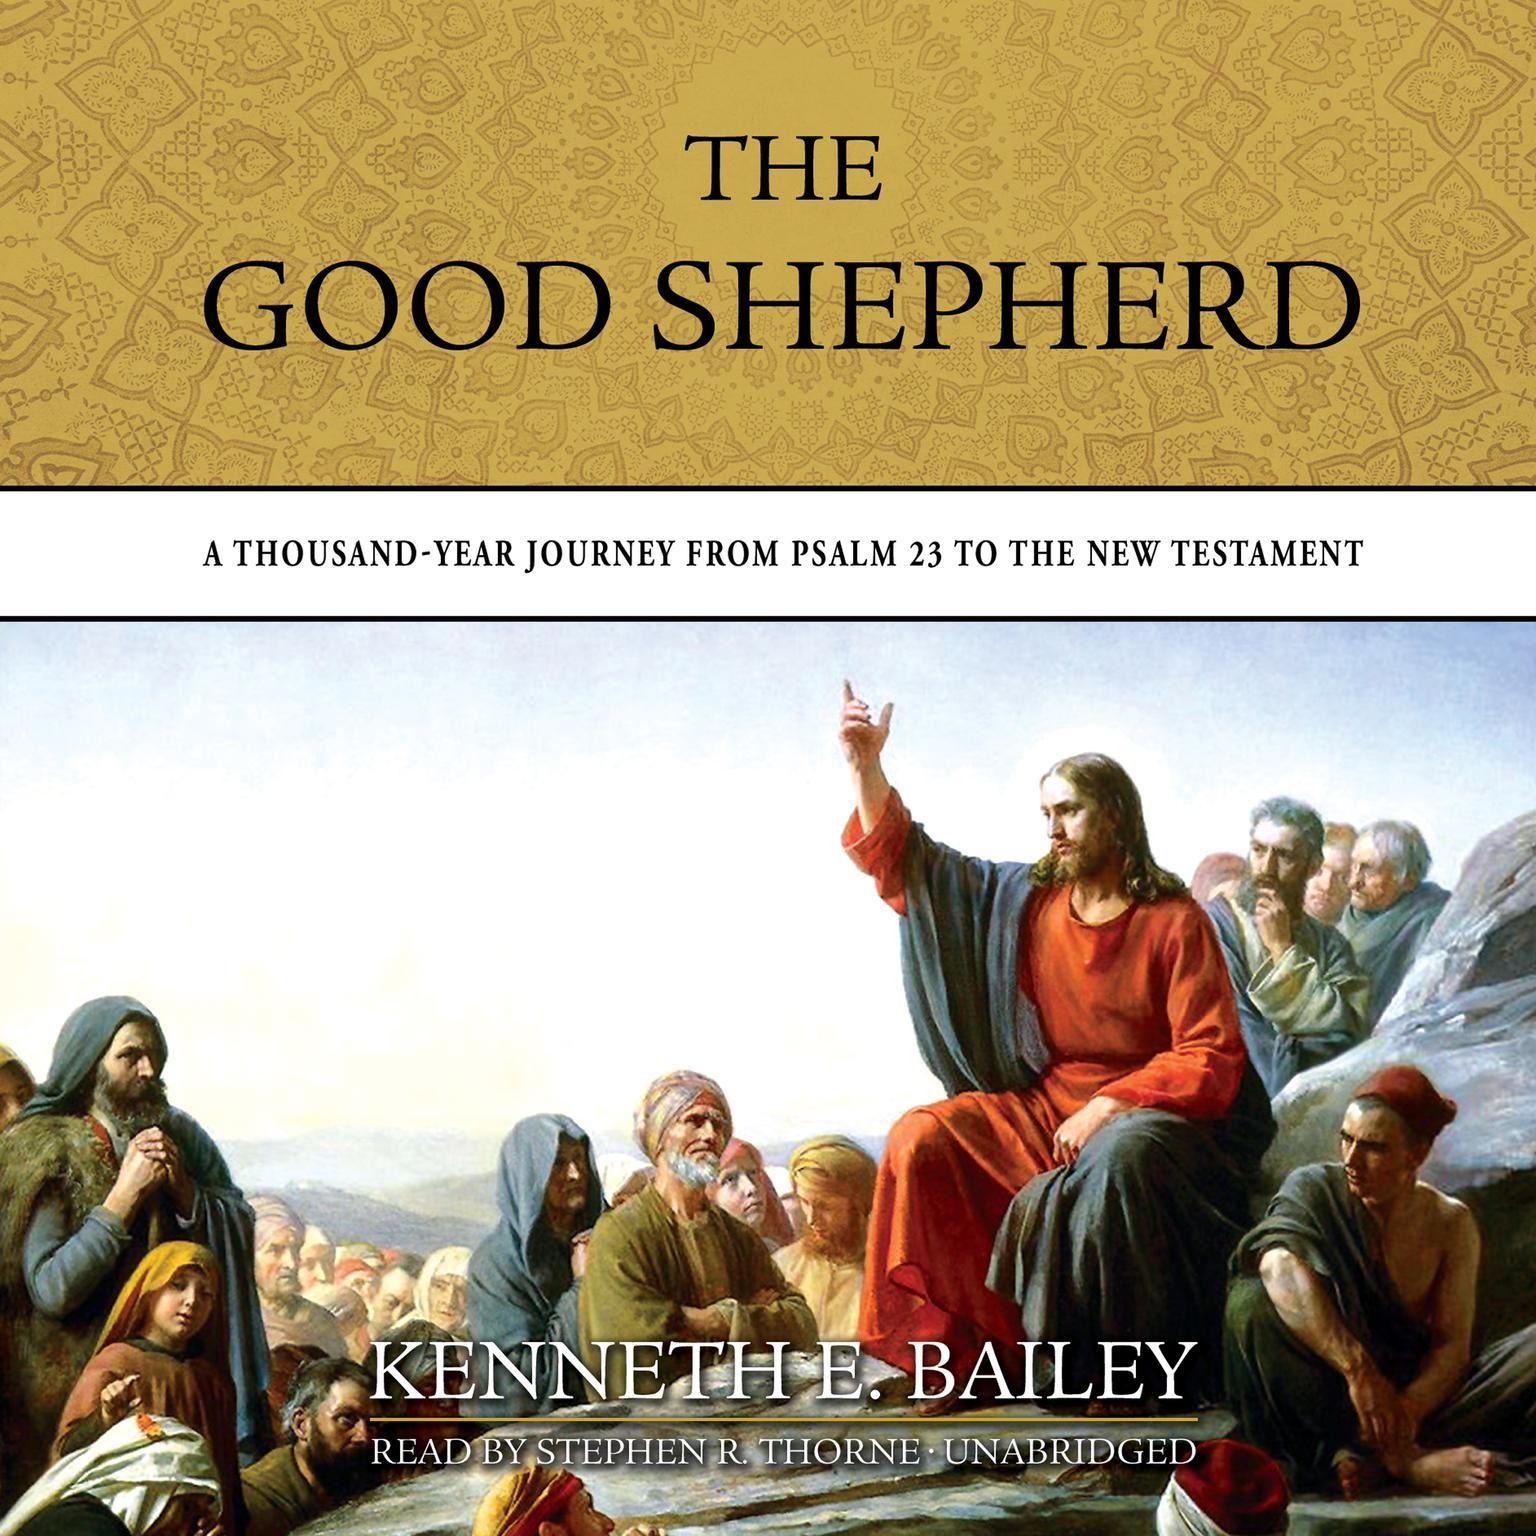 The Good Shepherd: A Thousand-Year Journey from Psalm 23 to the New Testament Audiobook, by Kenneth E. Bailey